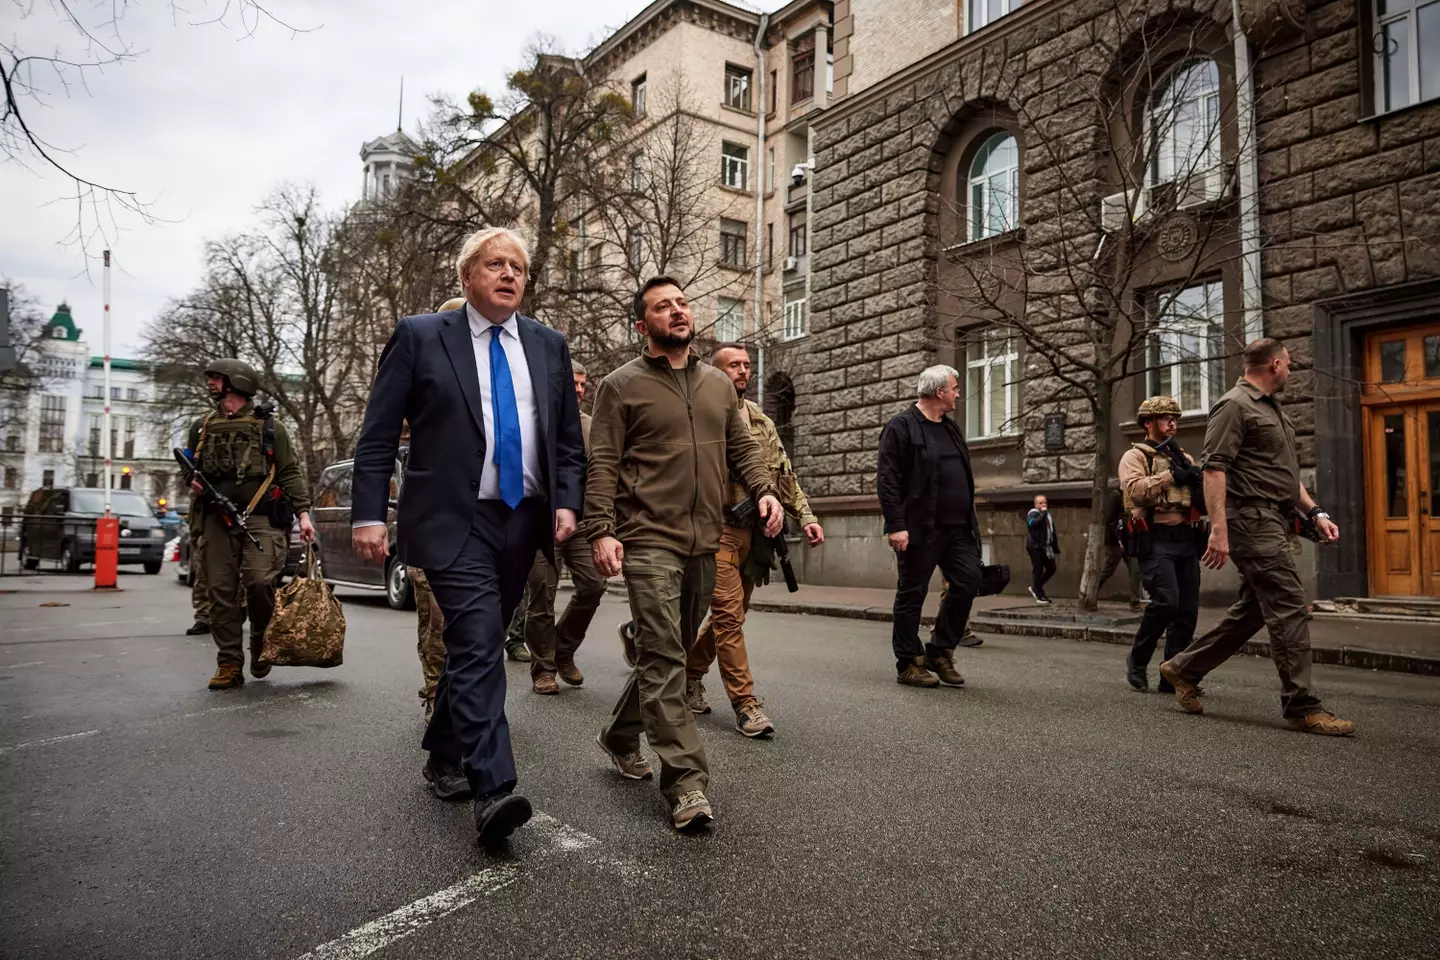 The President of Ukraine - Volodymyr Zelenskyy walks with Prime Minister of the United Kingdom - Boris Johnson through the streets of Kyiv with security forces.